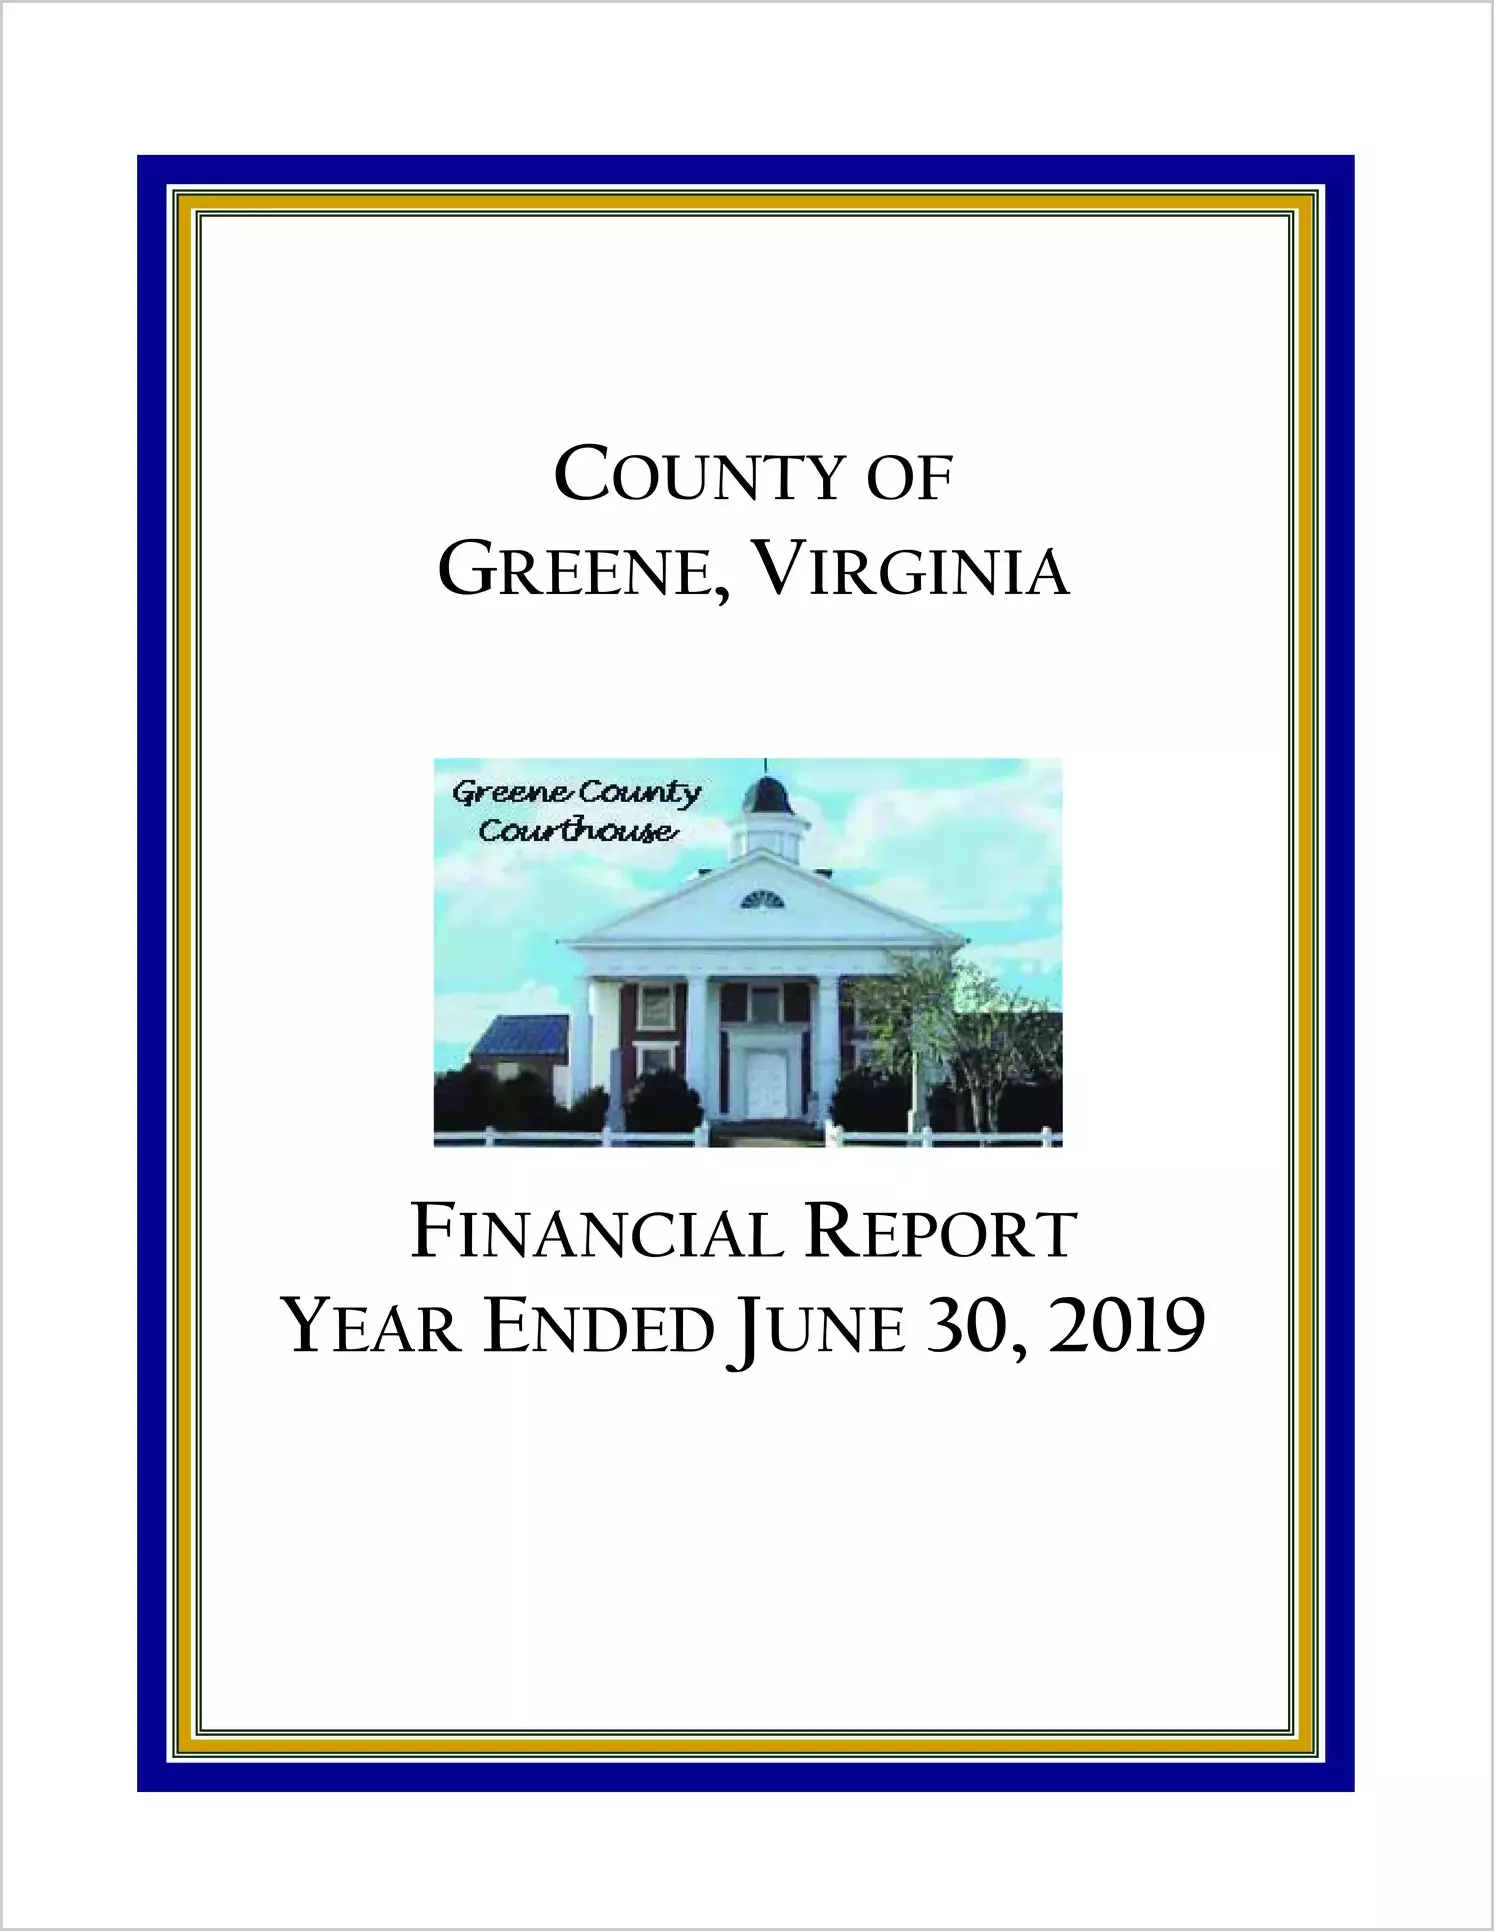 2019 Annual Financial Report for County of Greene